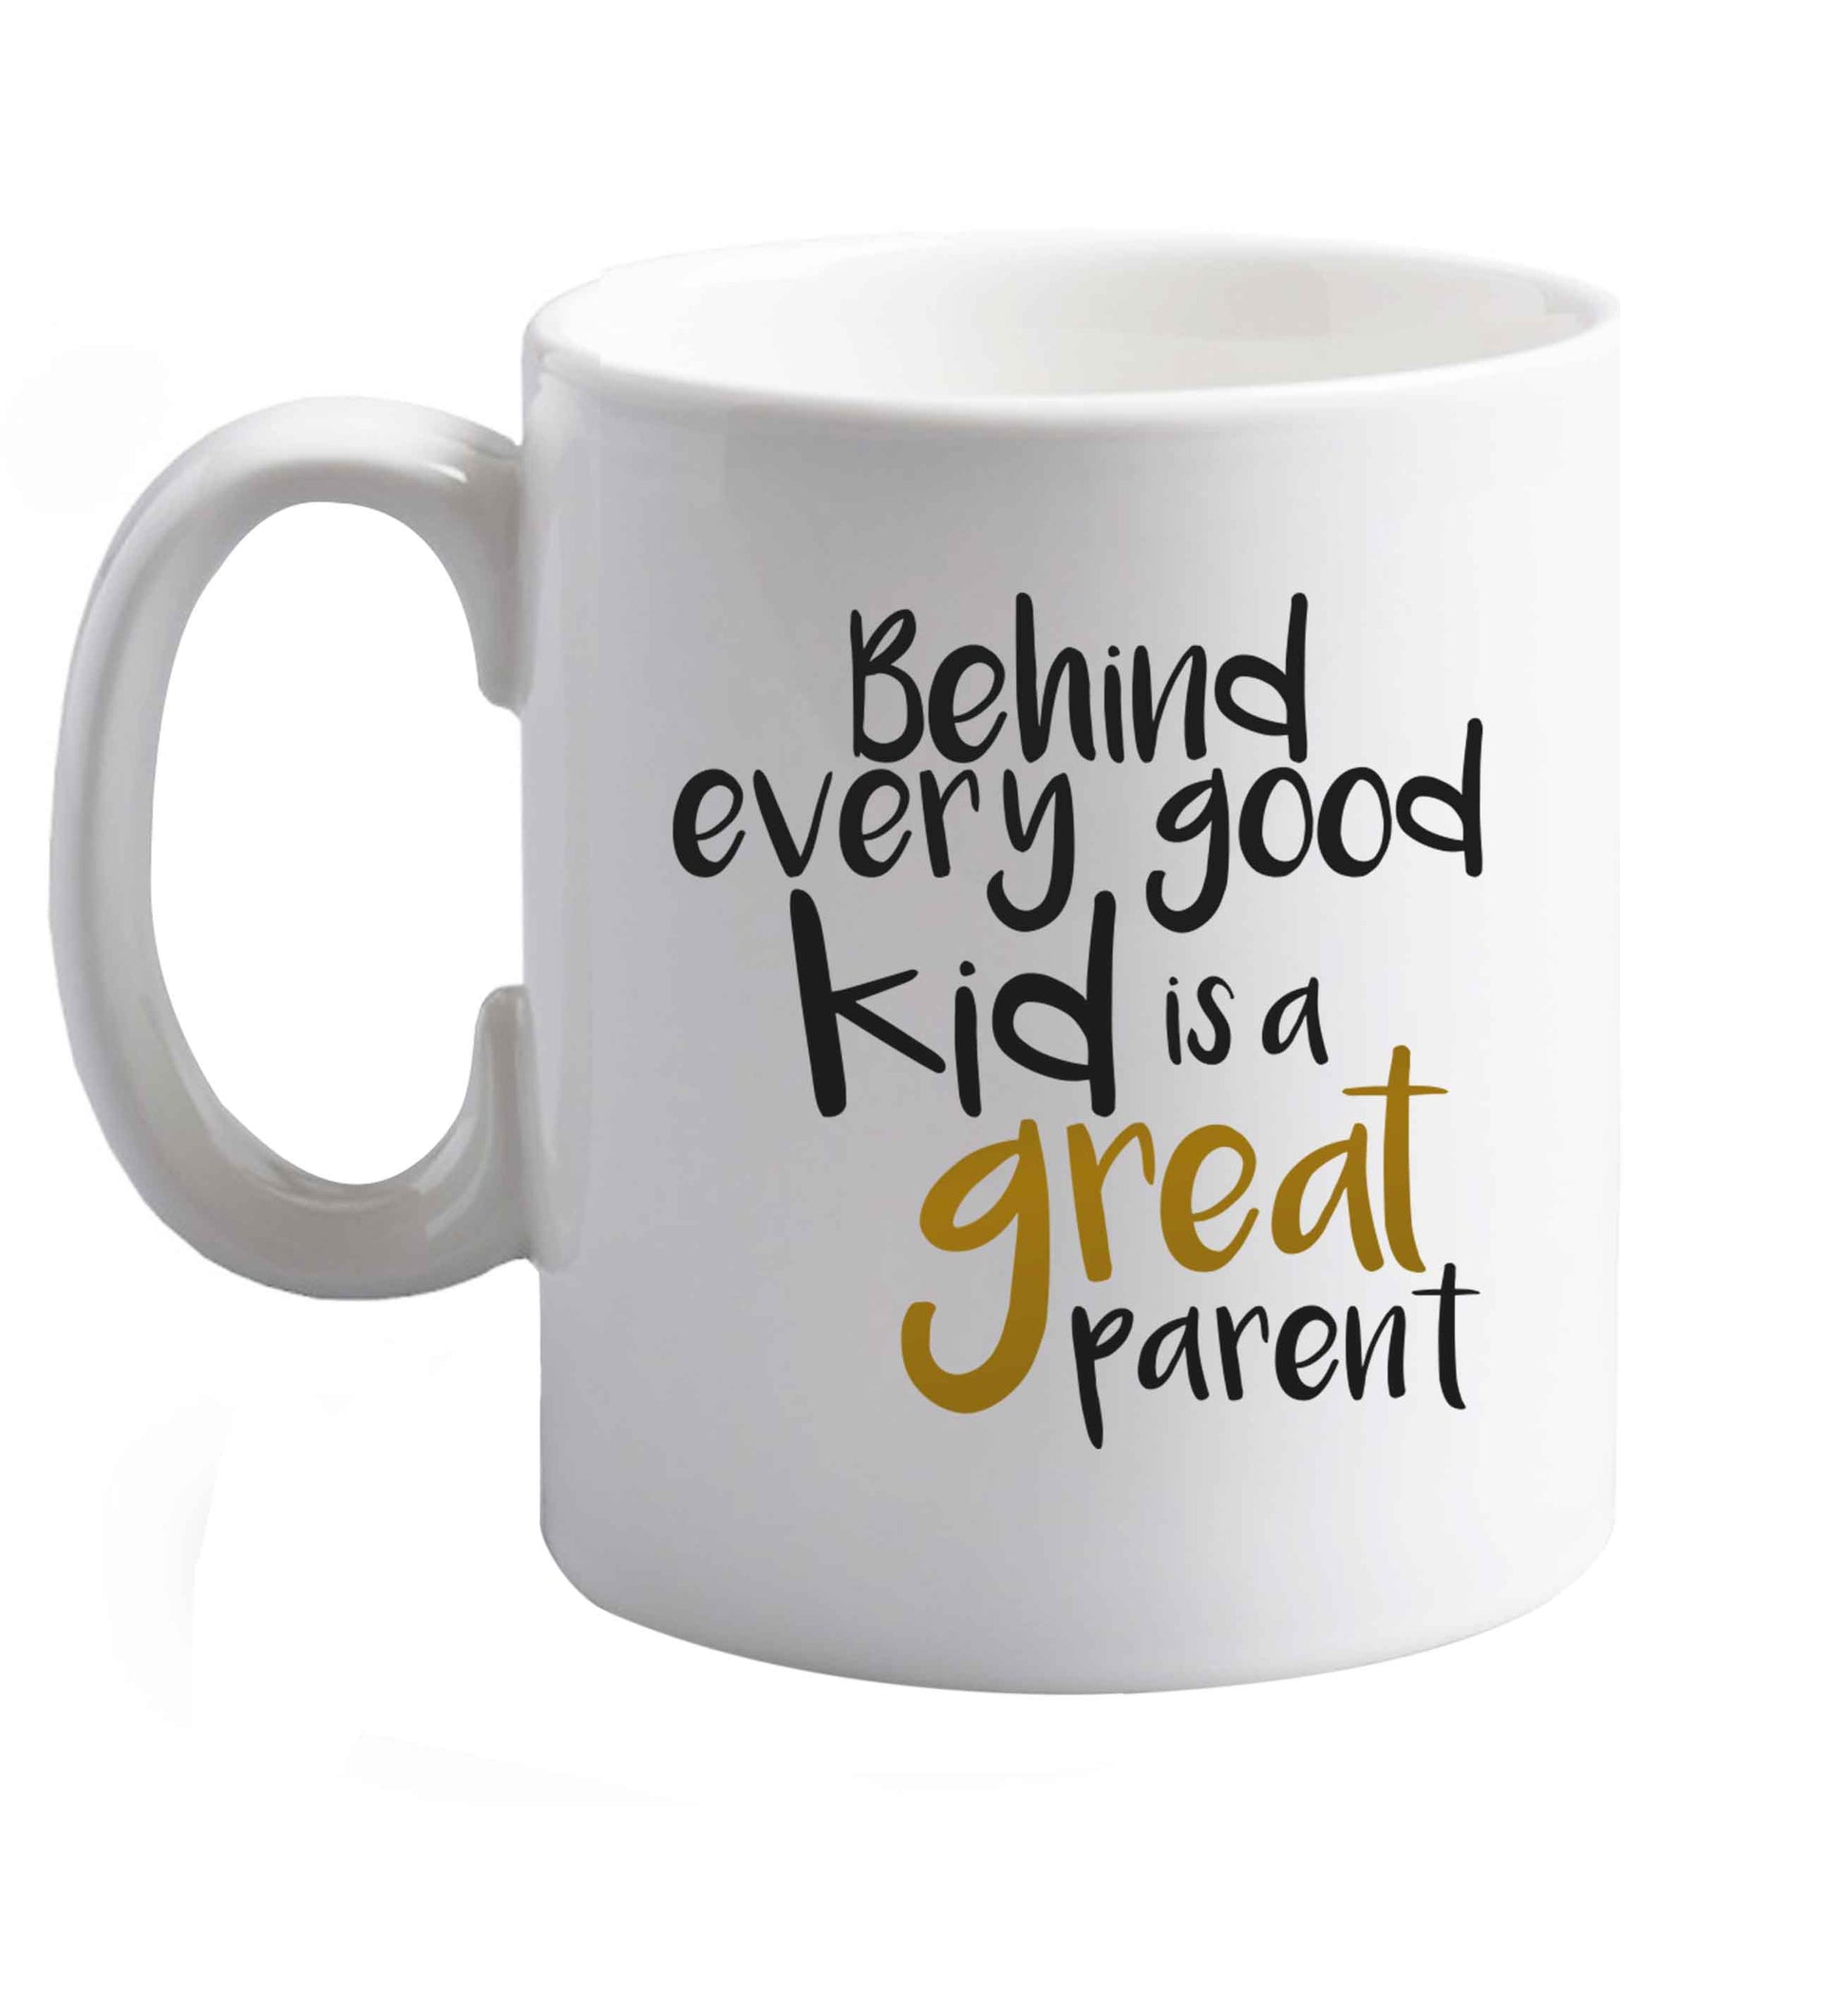 10 oz Behind every good kid is a great parent ceramic mug right handed